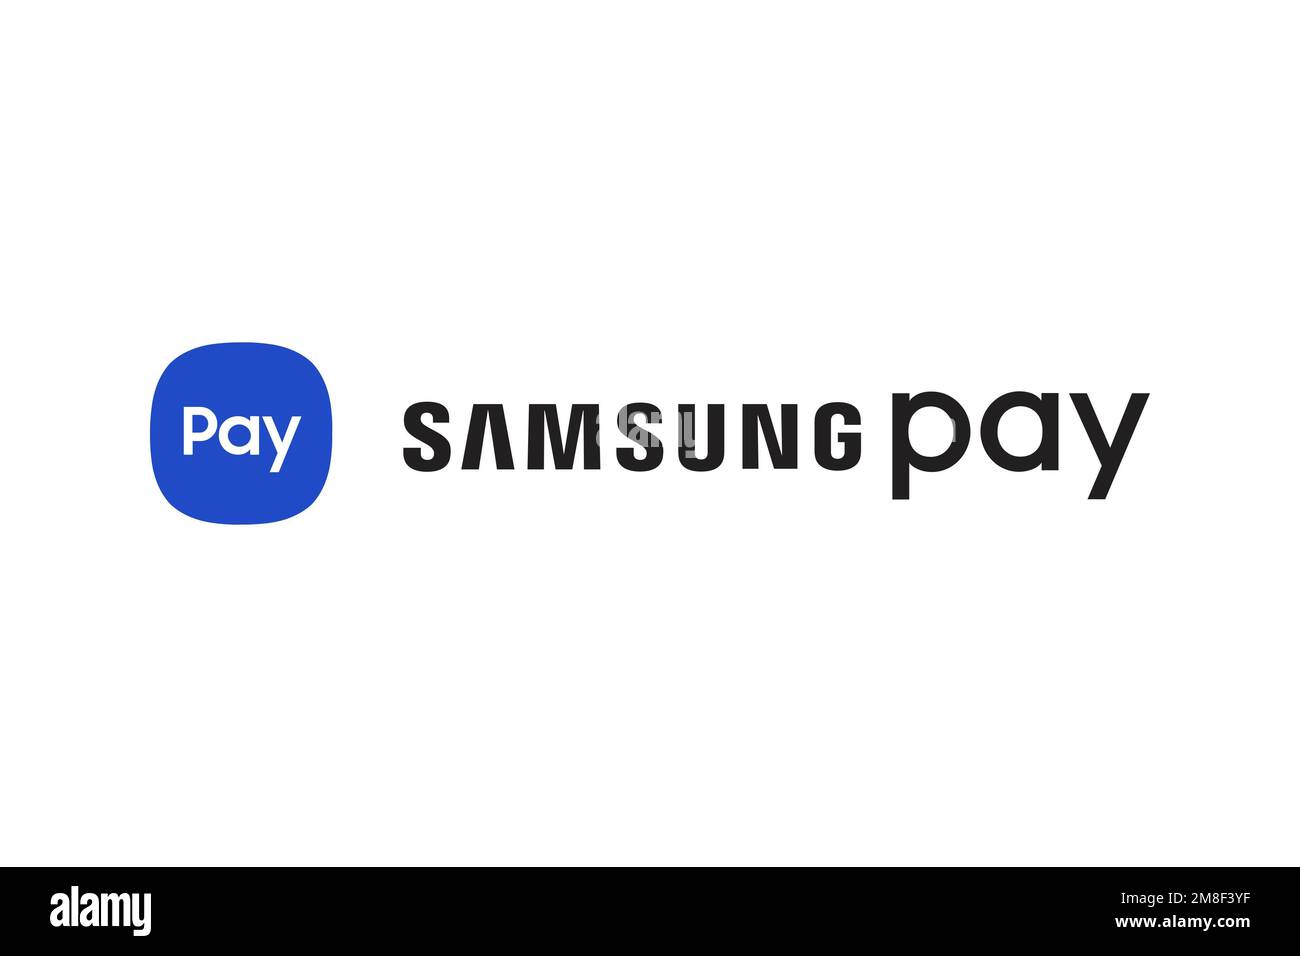 Samsung Pay Now Offers Even More "Rewarding" Digital Wallet Experience ...